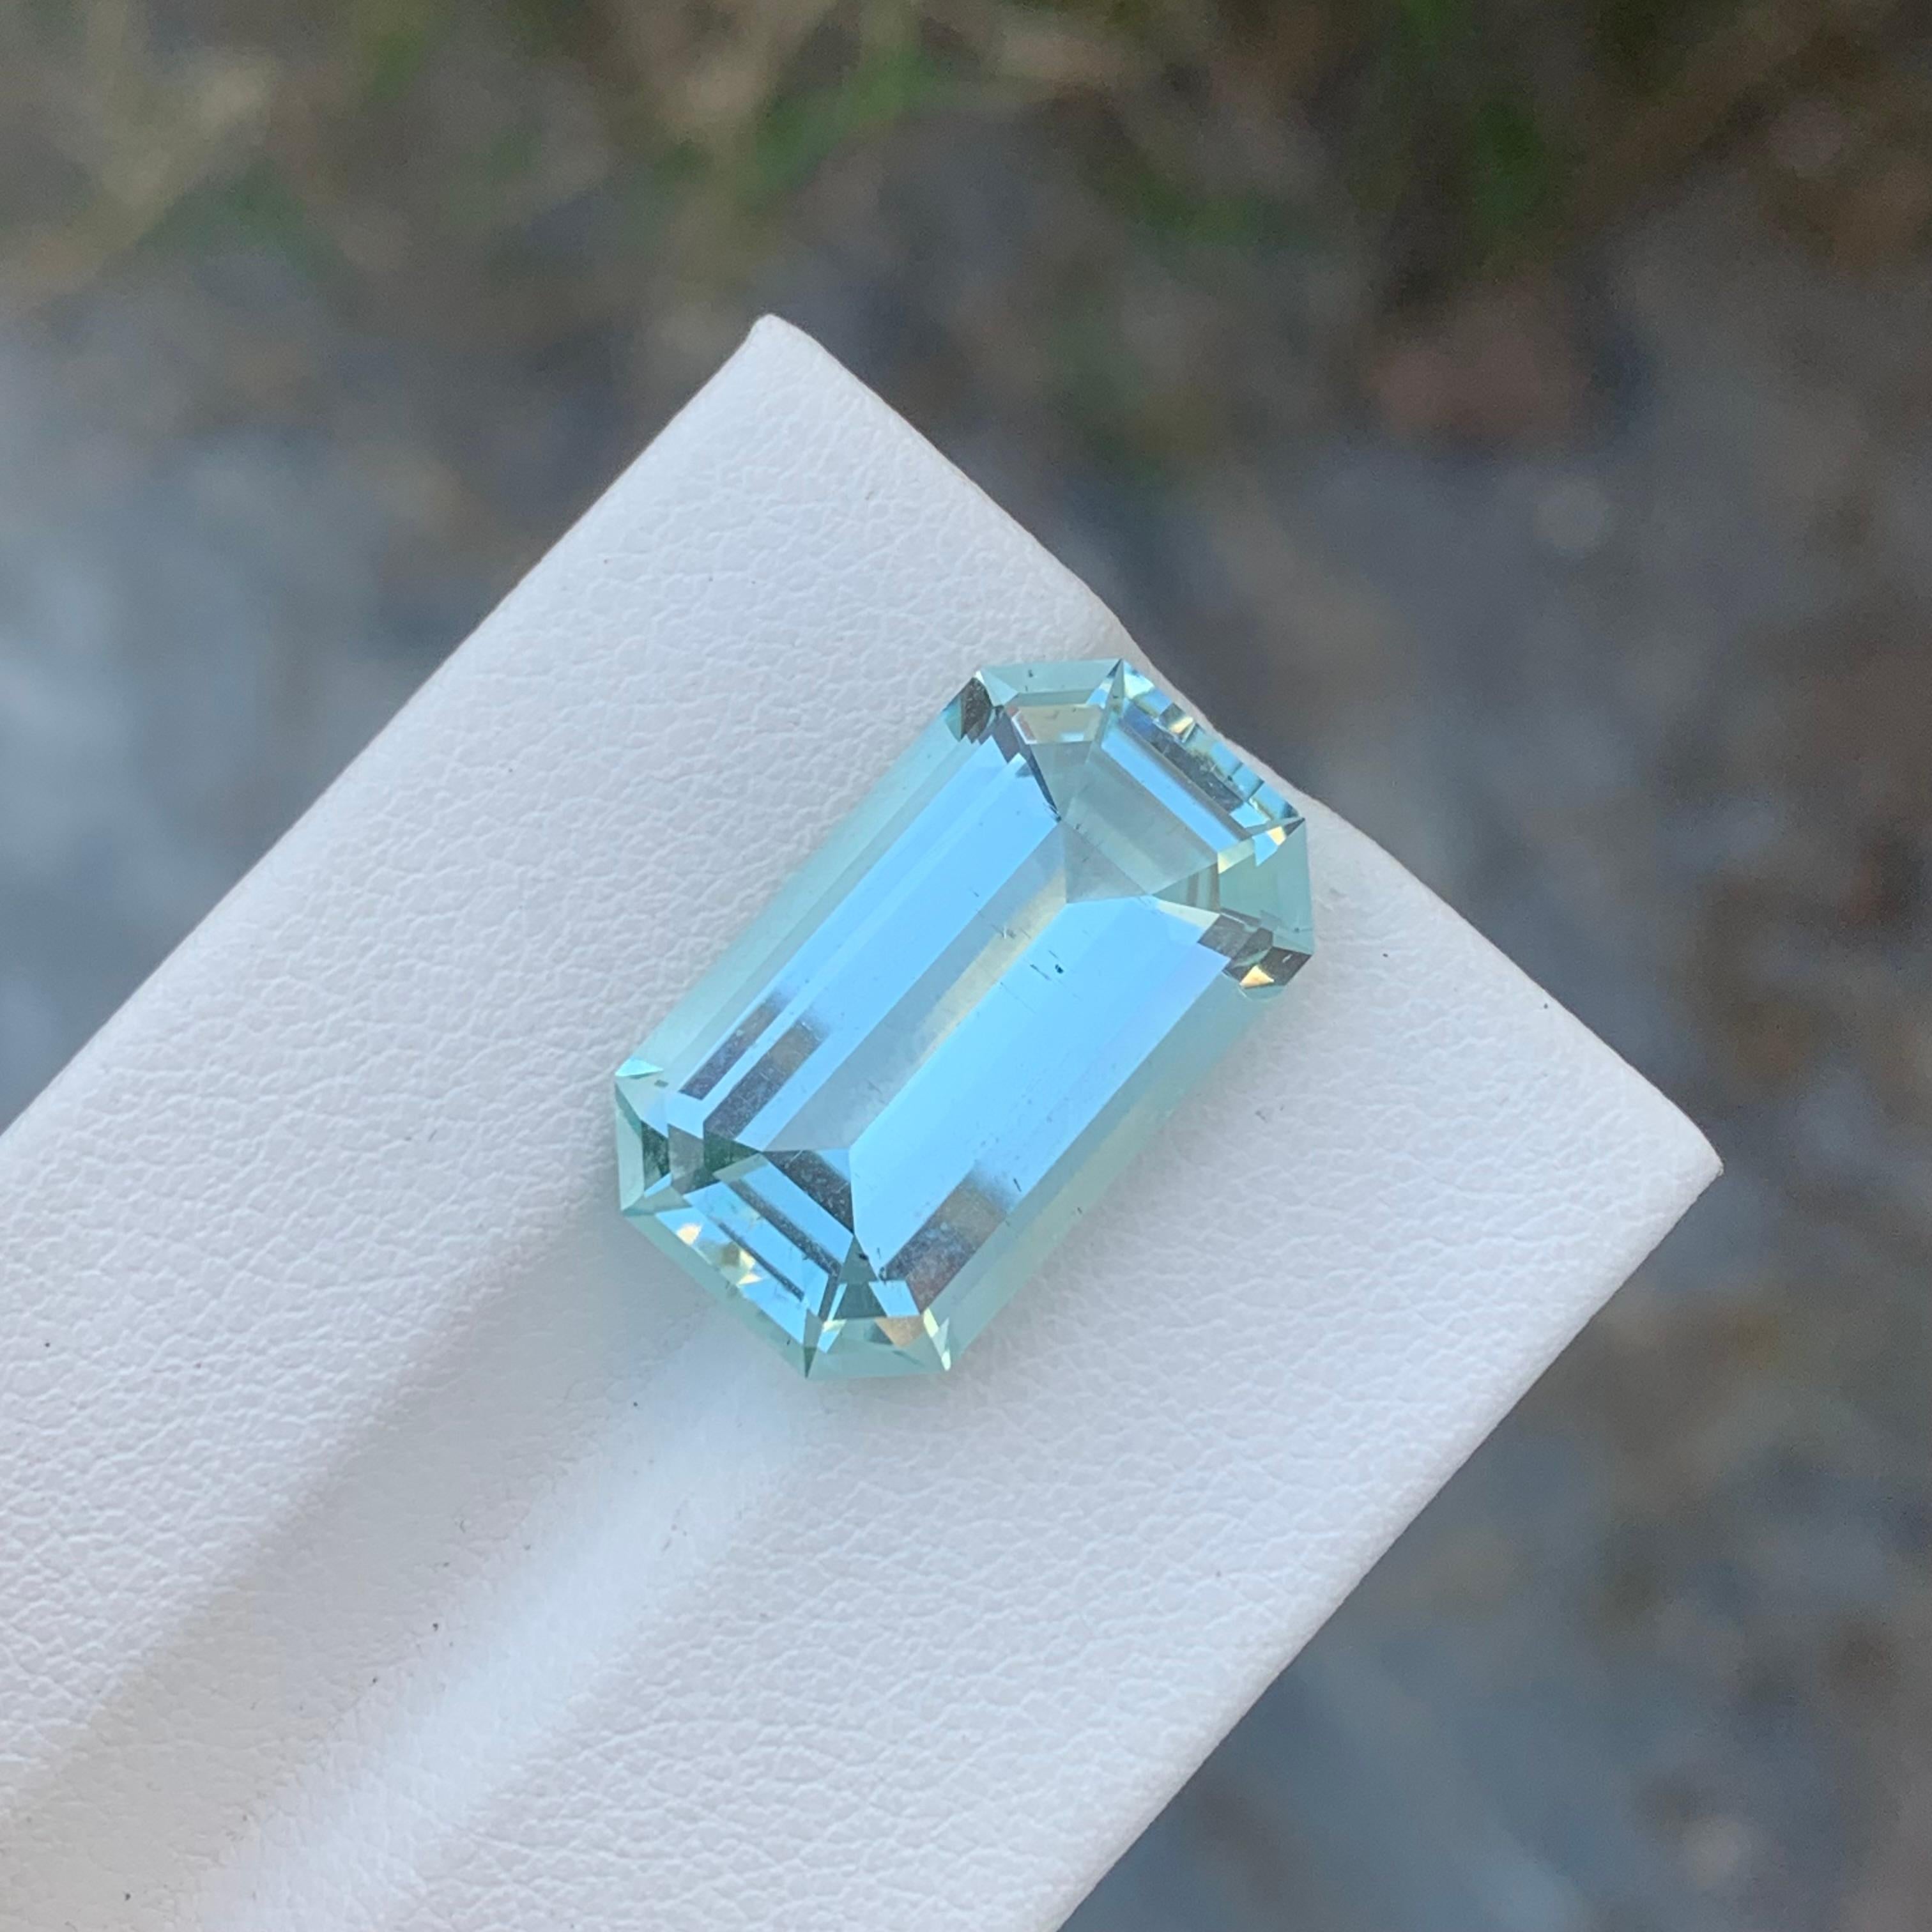 Loose Aquamarine
Weight: 11.20 Carat
Dimension: 19.3 x 11.4 x 7.4 Mm
Colour : Pale  Blue 
Origin: Shigar Valley, Pakistan
Treatment: Non
Certificate : On Demand
Shape: Emerald 

Aquamarine is a captivating gemstone known for its enchanting